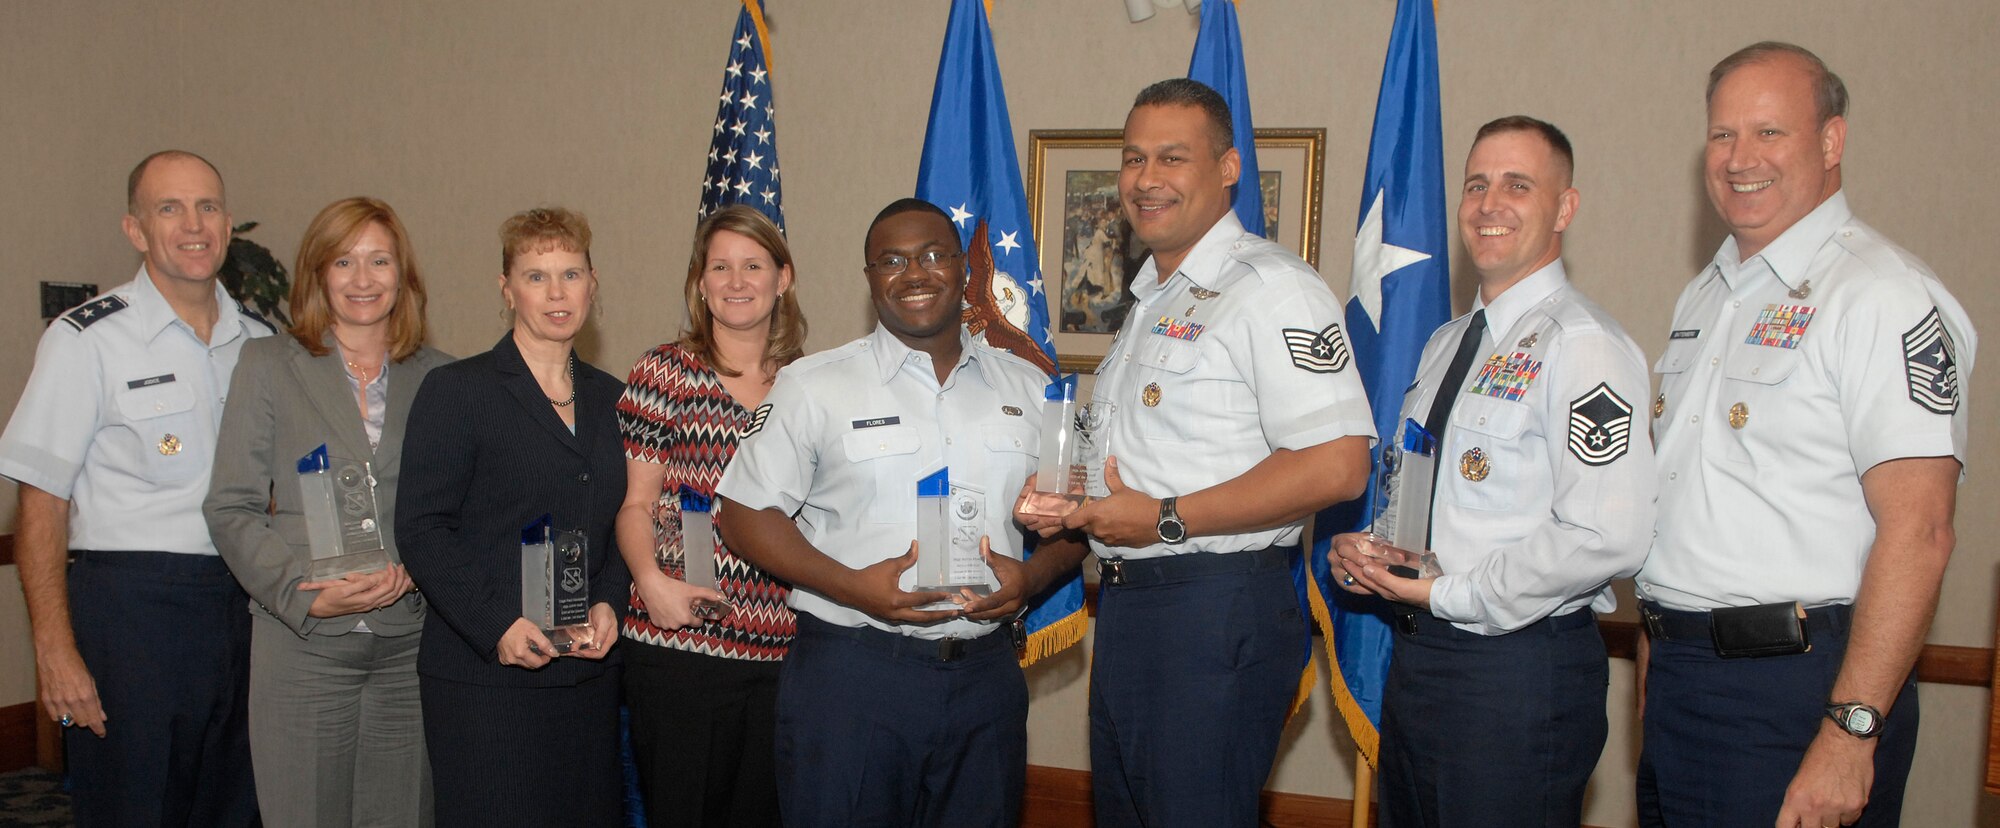 AFDW commander Maj. Gen. Ralph Jodice (far left) and Chief Master Sgt. Pat Battenberg AFDW command chief (far right)  pose with AFDW Quarterly Awards winners. From left to right are:  Ms. Linda Mandell, Ms. Susan Bench-Snow (representing Capt. Hauspurg), Ms. Jennifer Weatherly, Staff Sgt. Felicio Flores, Tech. Sgt. Tyrone Evans and Master Sgt. Charles Mecurio. All award winners will be vying for basewide recognition at the Nov. 6 Team Andrews quarterly awards.  (U.S. Air Force photo by Staff Sgt. Melissa Stonecipher). 
